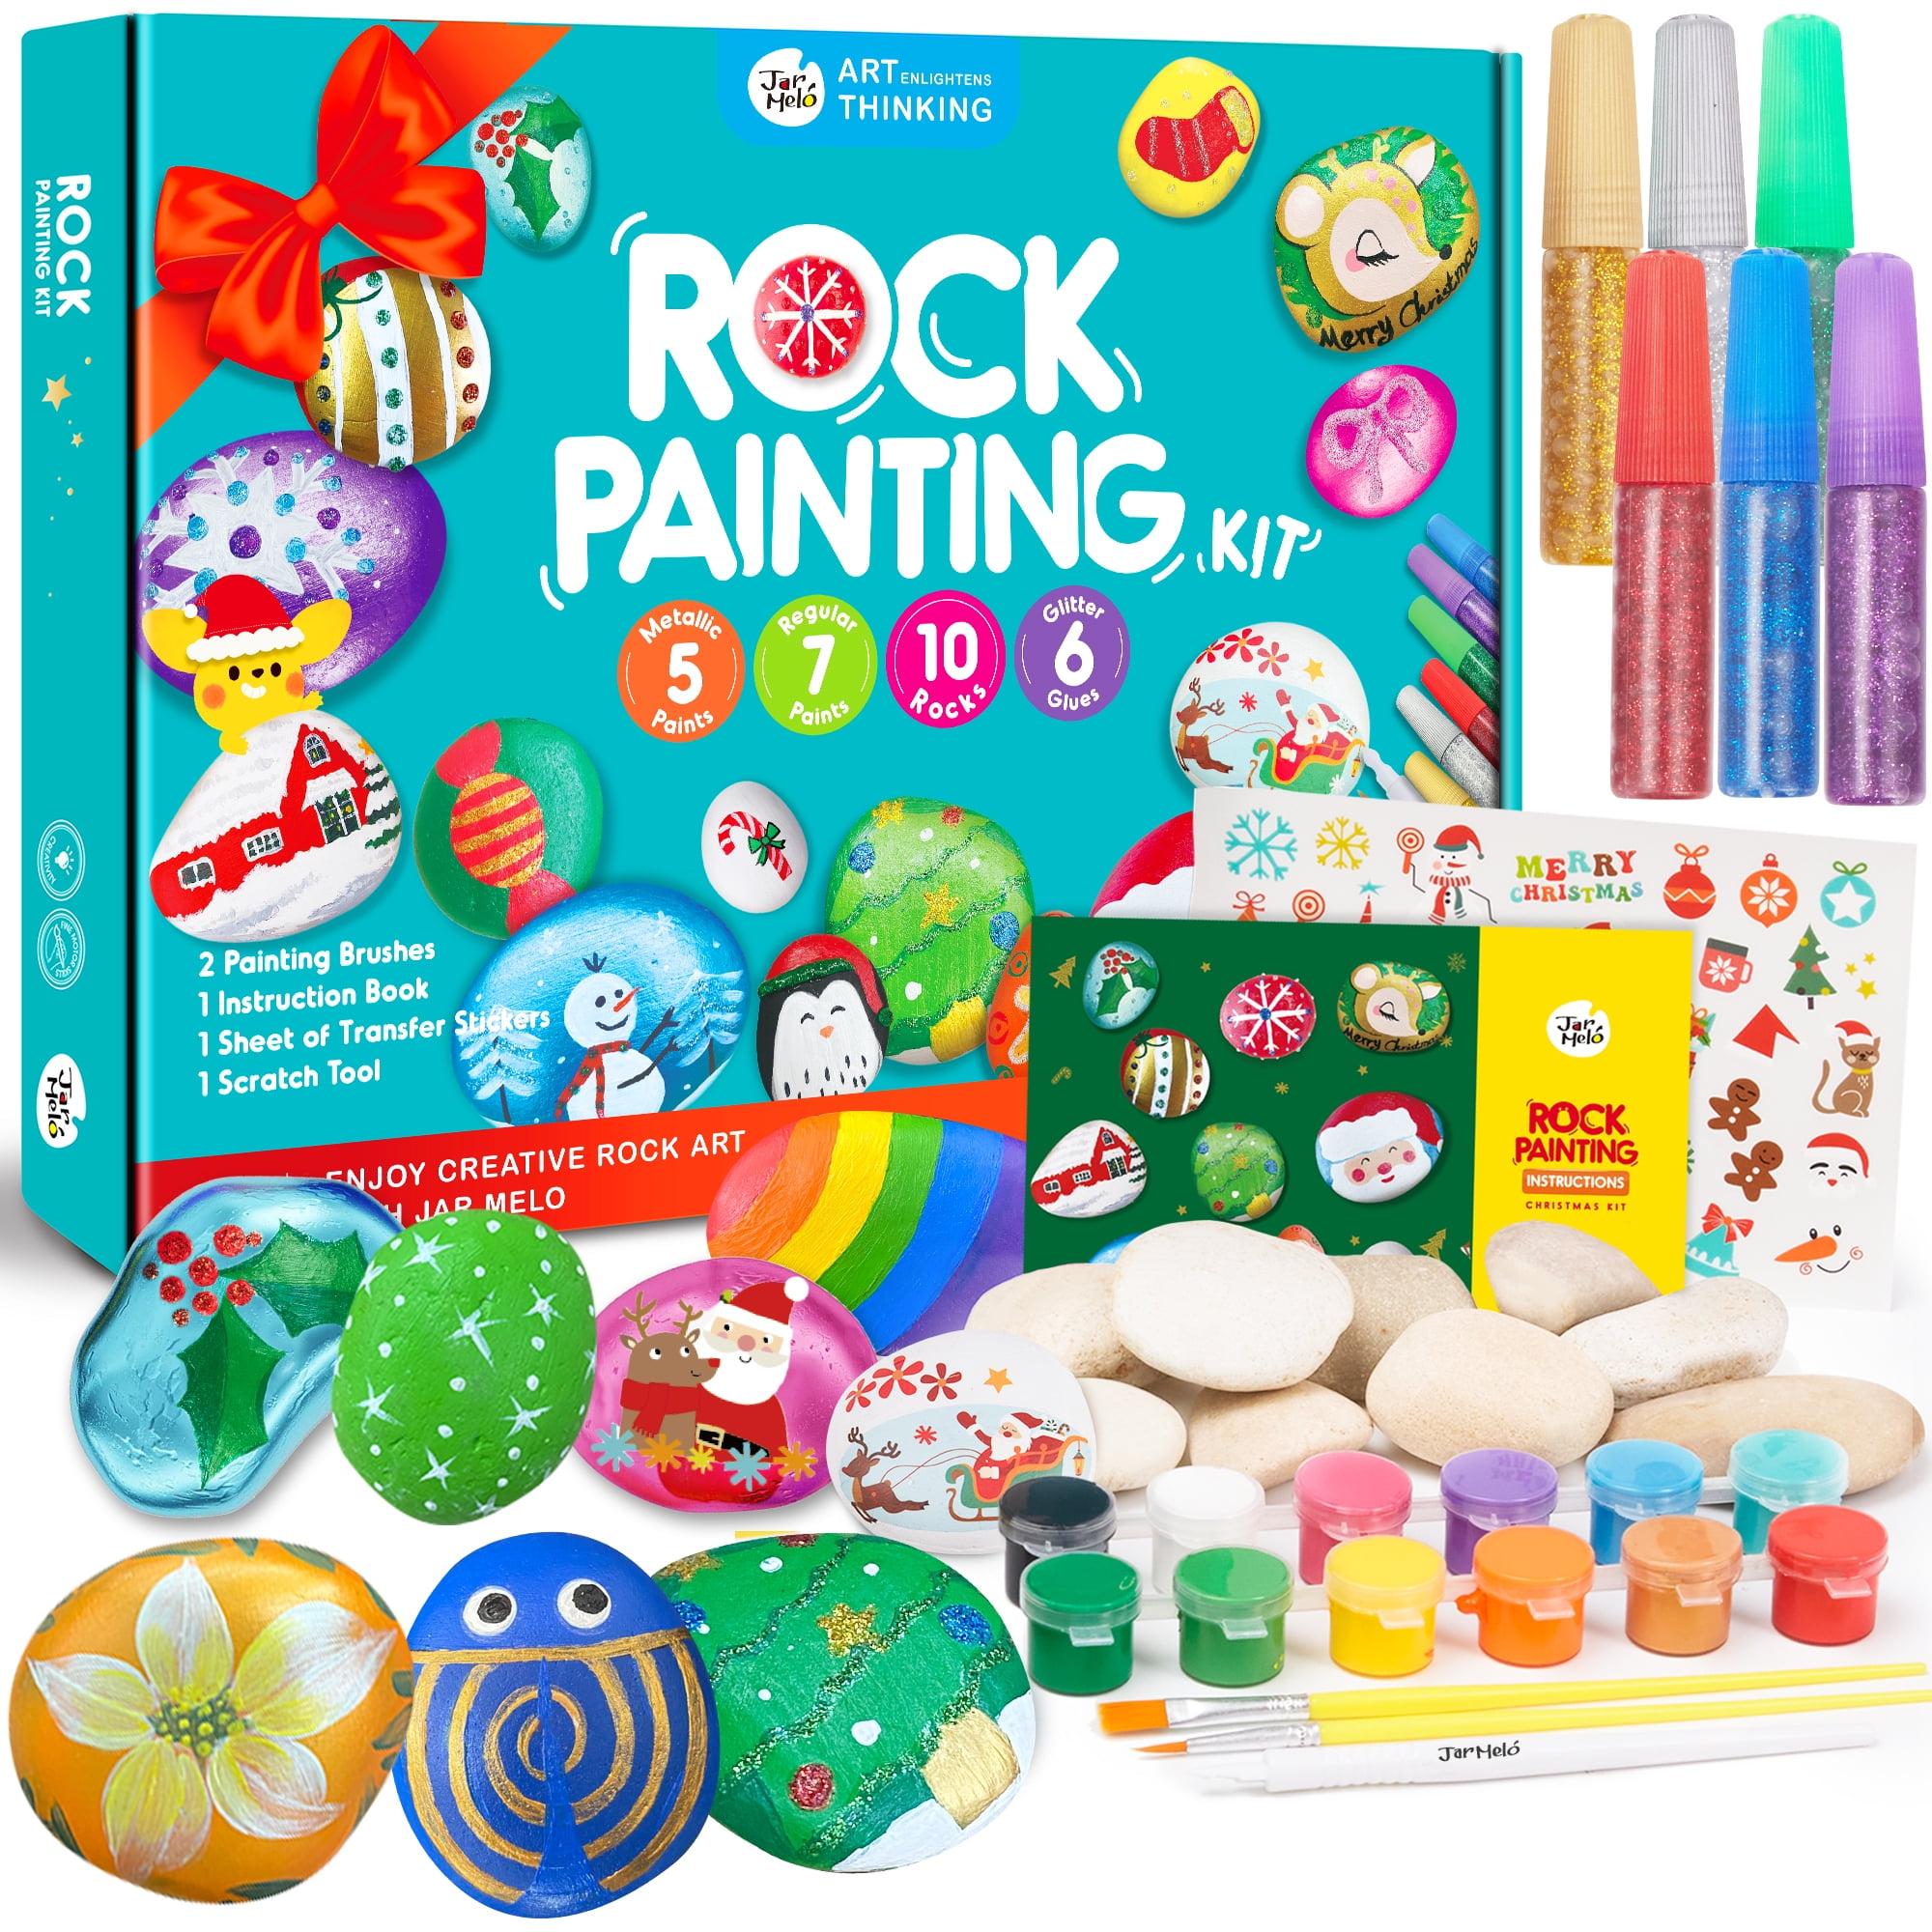 Glow In The Dark Rock Painting Kit for Kids - Arts and Crafts for Girls  Boys Ages 6-12 - Art Craft Kits Paint Set - Supplies for Painting Rocks -  DIY Gift Ideas Activities Age 4 6 7 8- 12 9-12